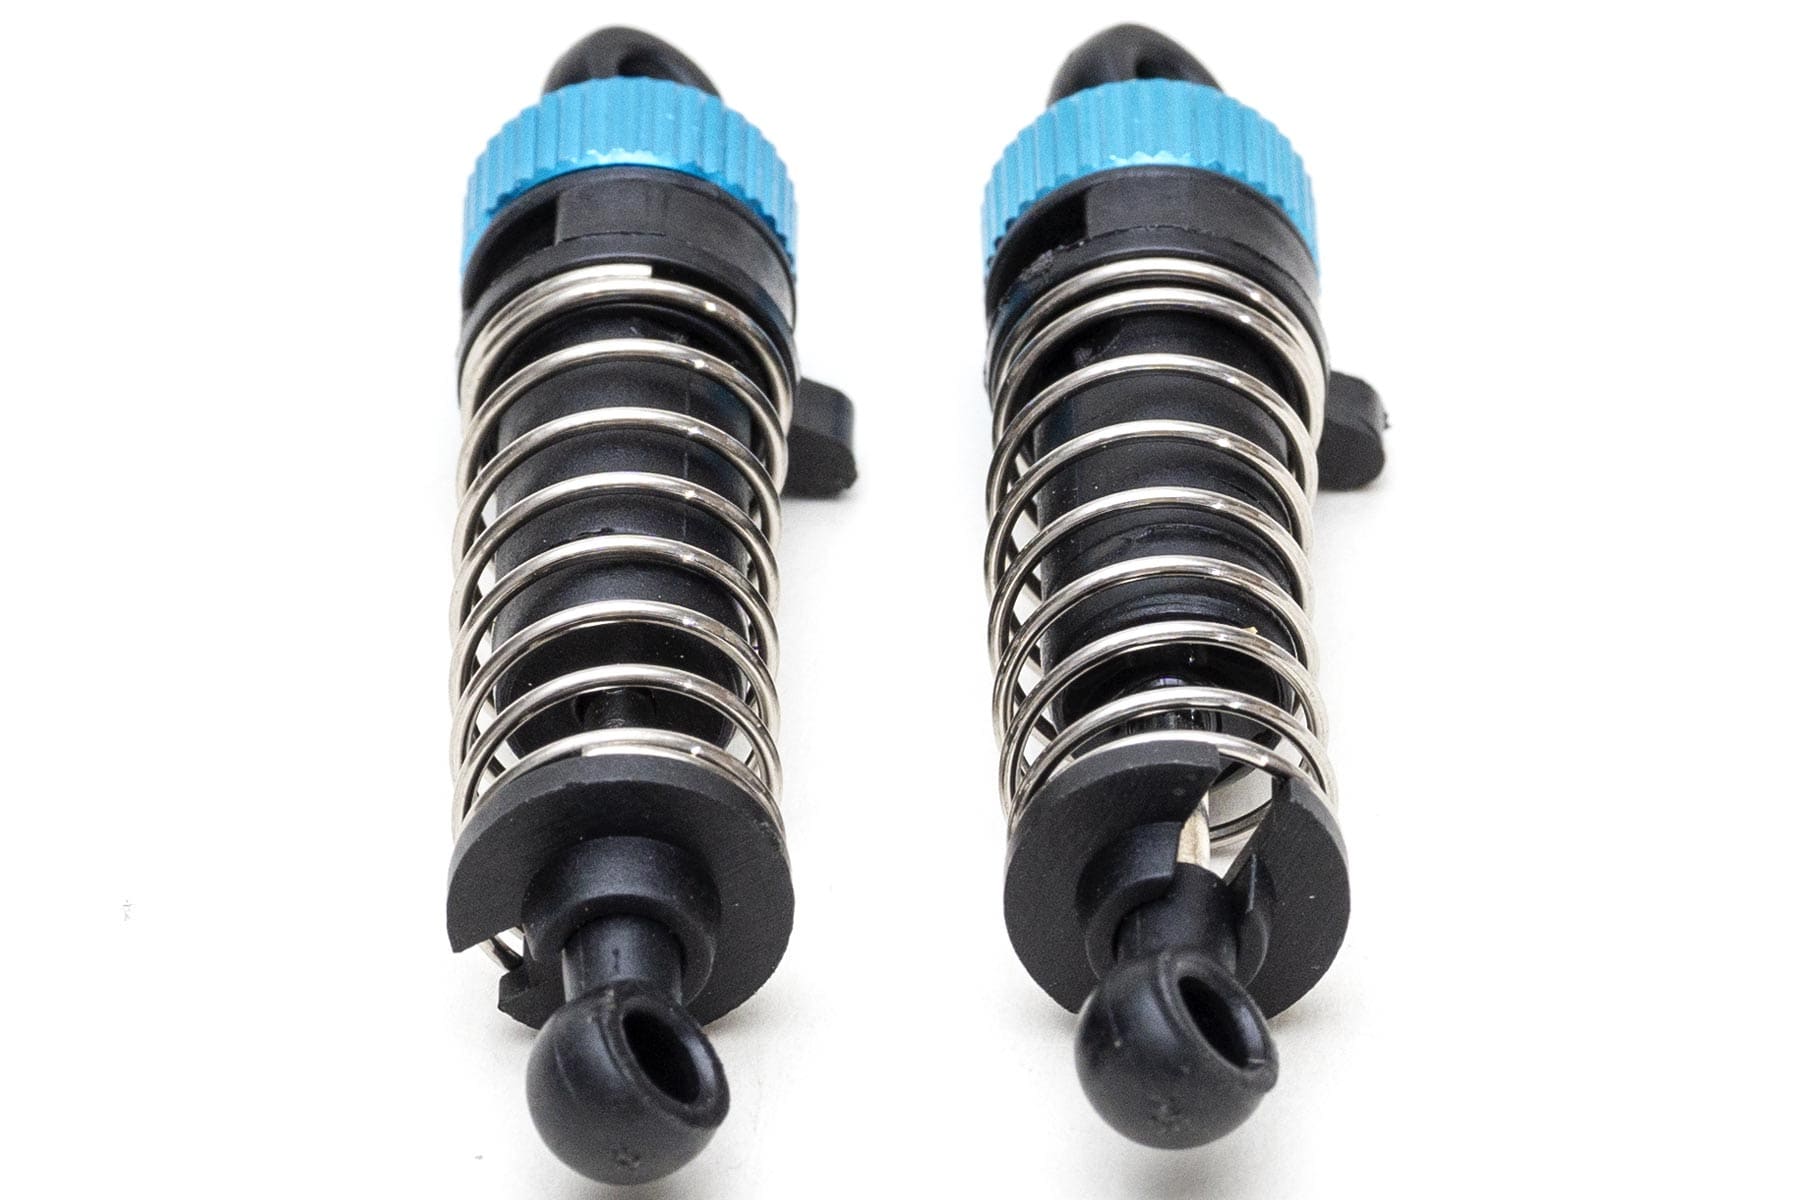 XK 1/18 Scale High Speed Buggy Rear Shock (2 pcs) WLT-A959B-22